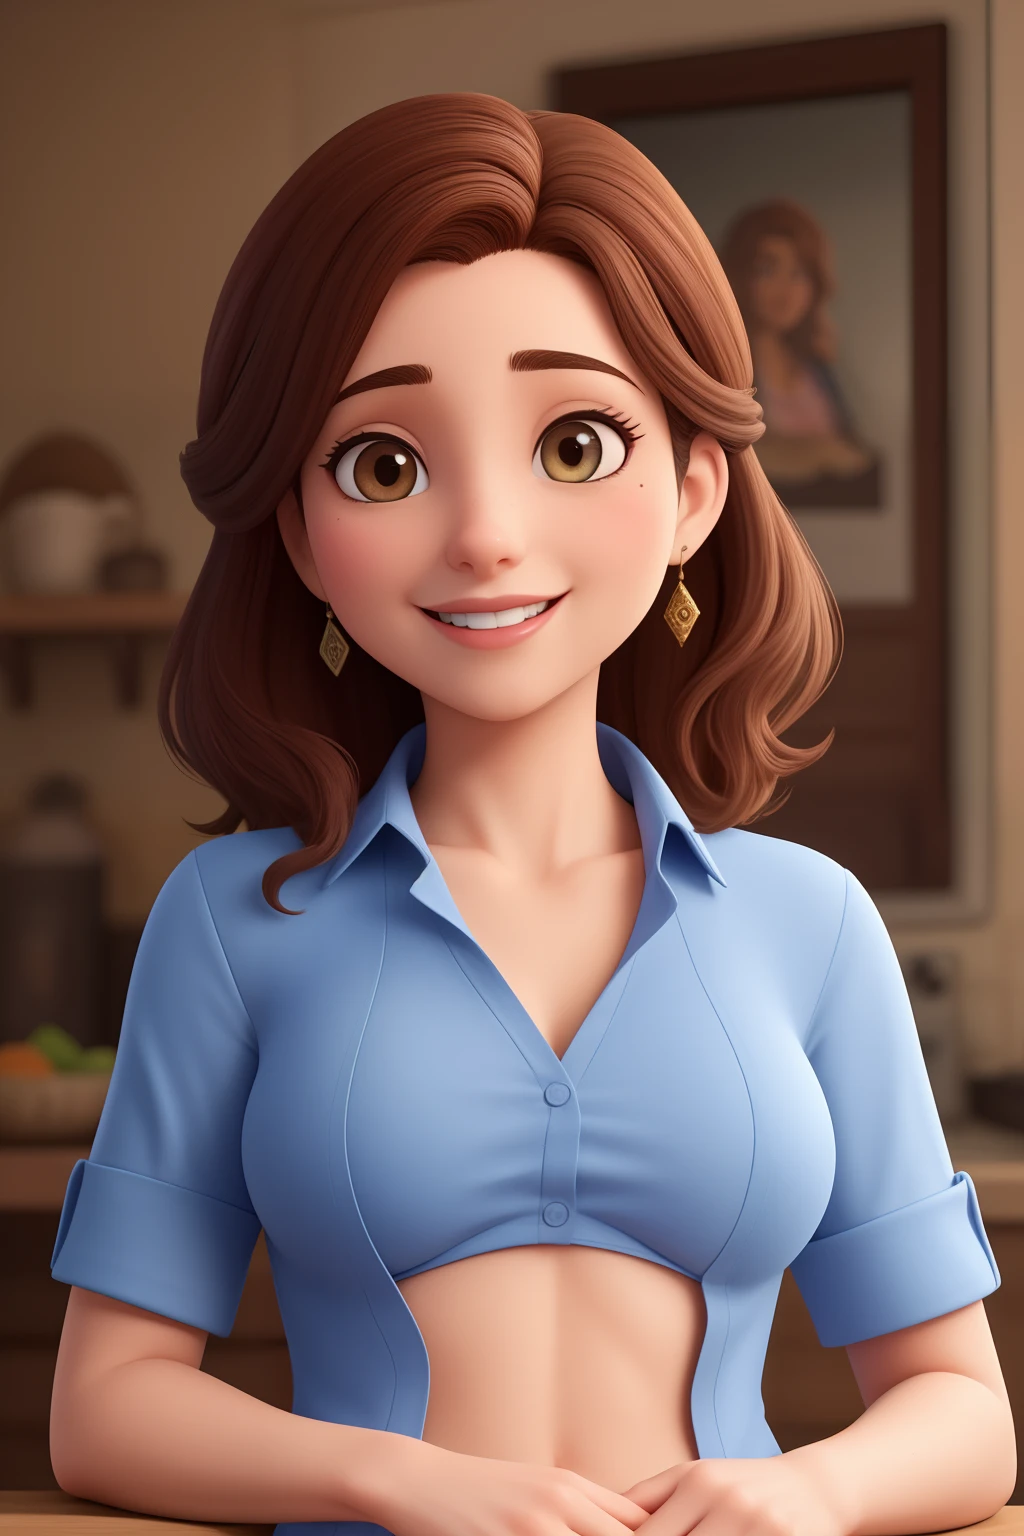 A Woman 30 years old, architect, with medium hair, dark brown, Round face, charmer smile, and brown, slightly slanted eyes, brunette skin, wearing a shirt and working.